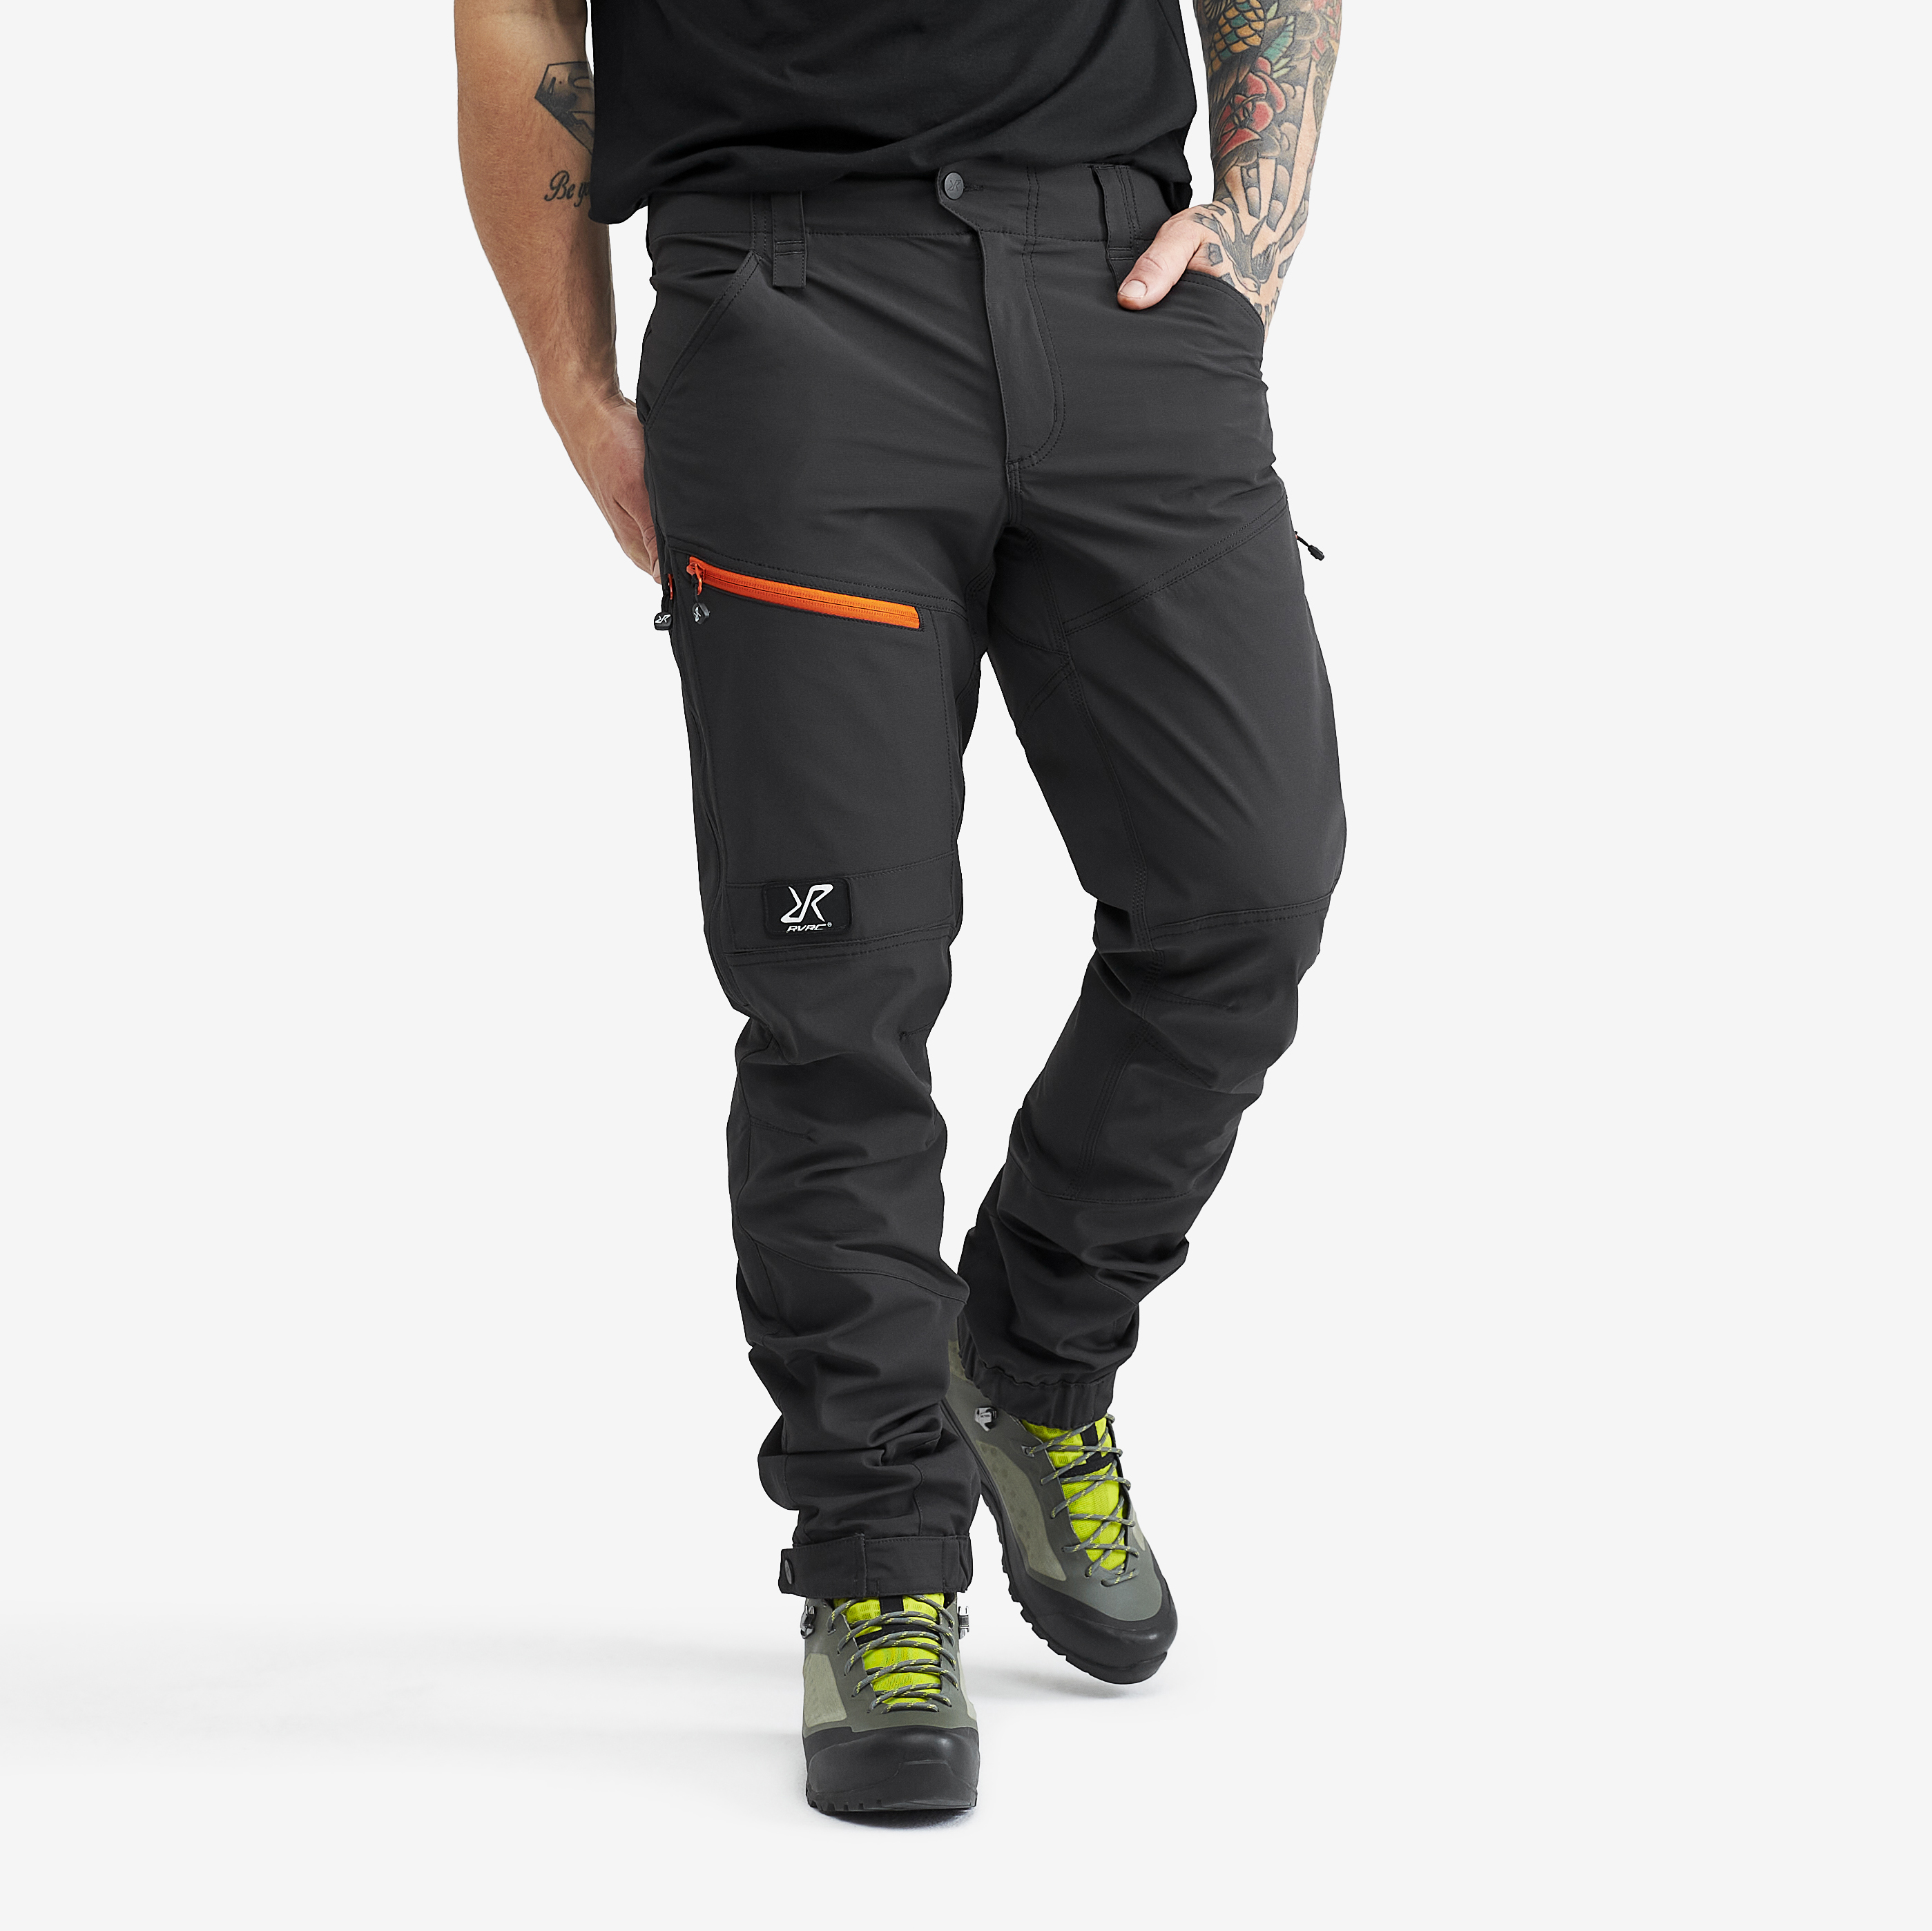 Silence Trousers Anthracite Men